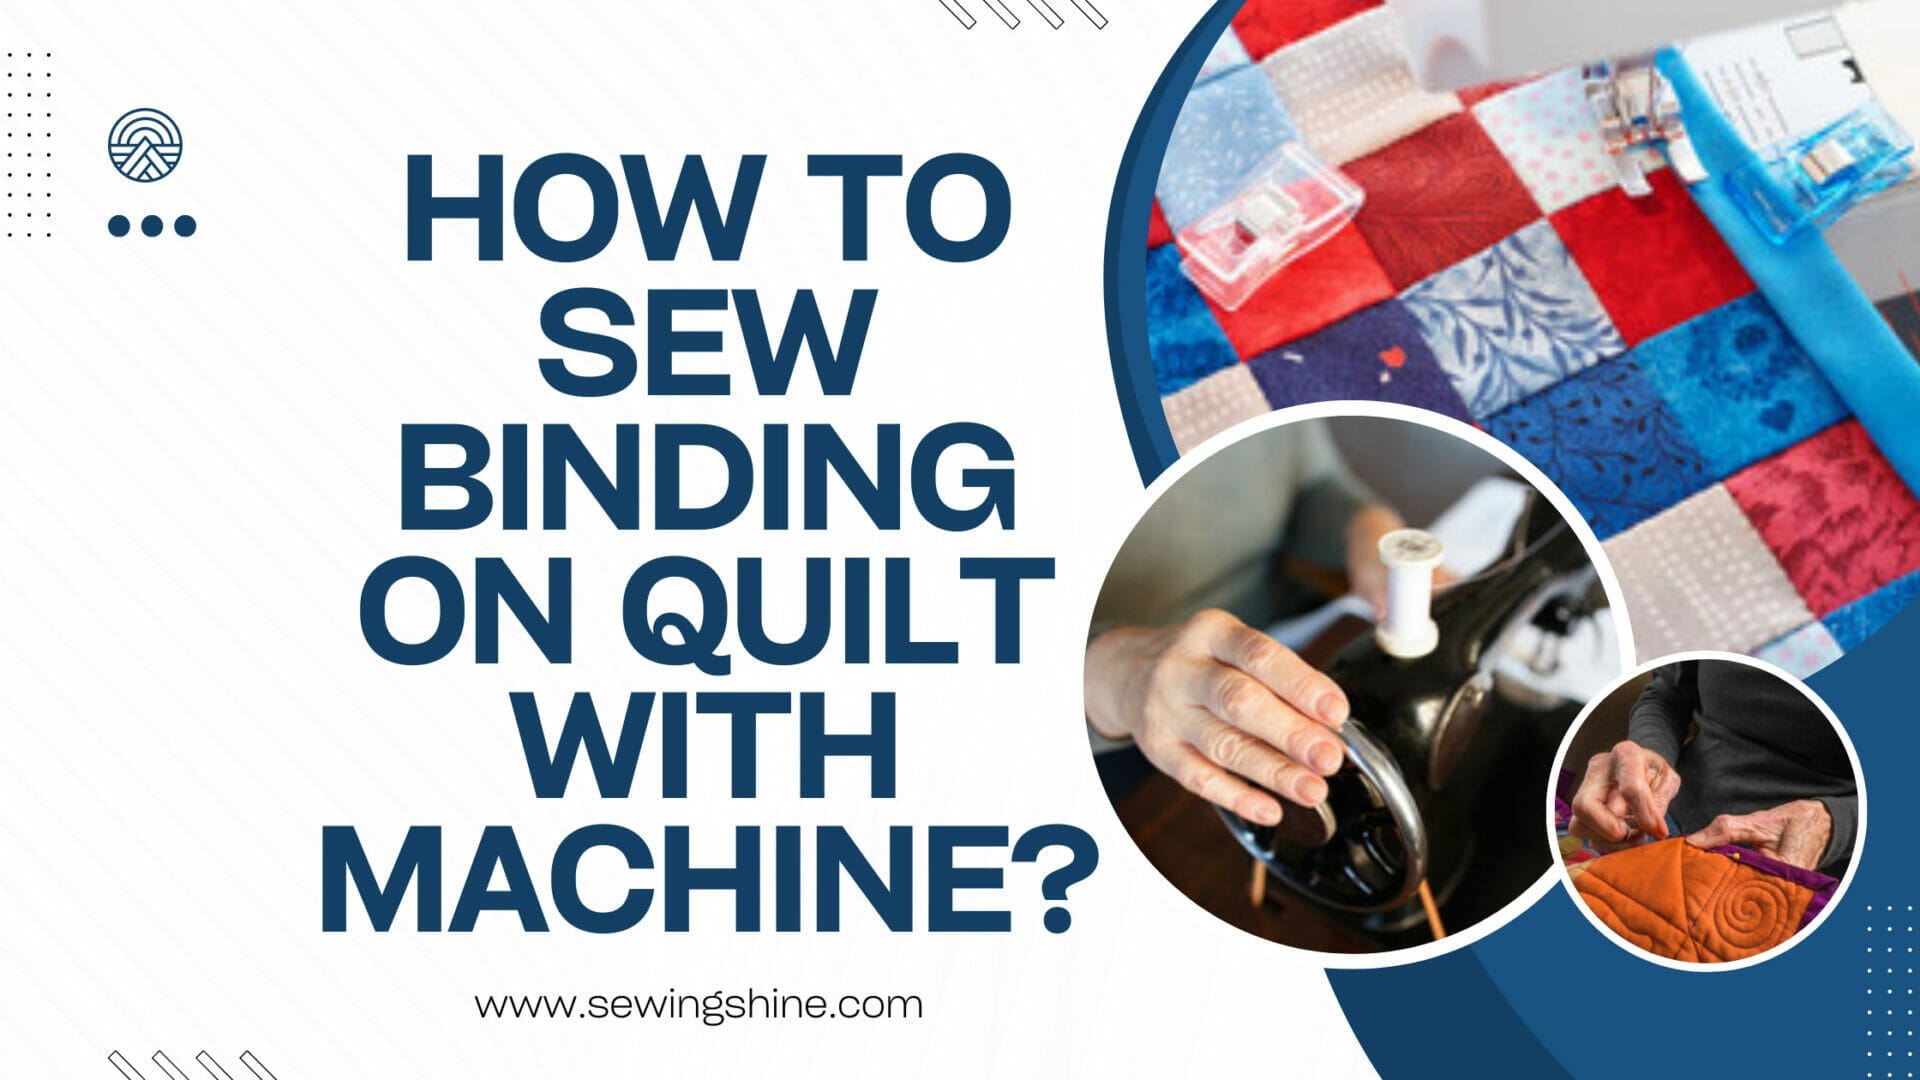 How To Sew Binding On Quilt With Machine